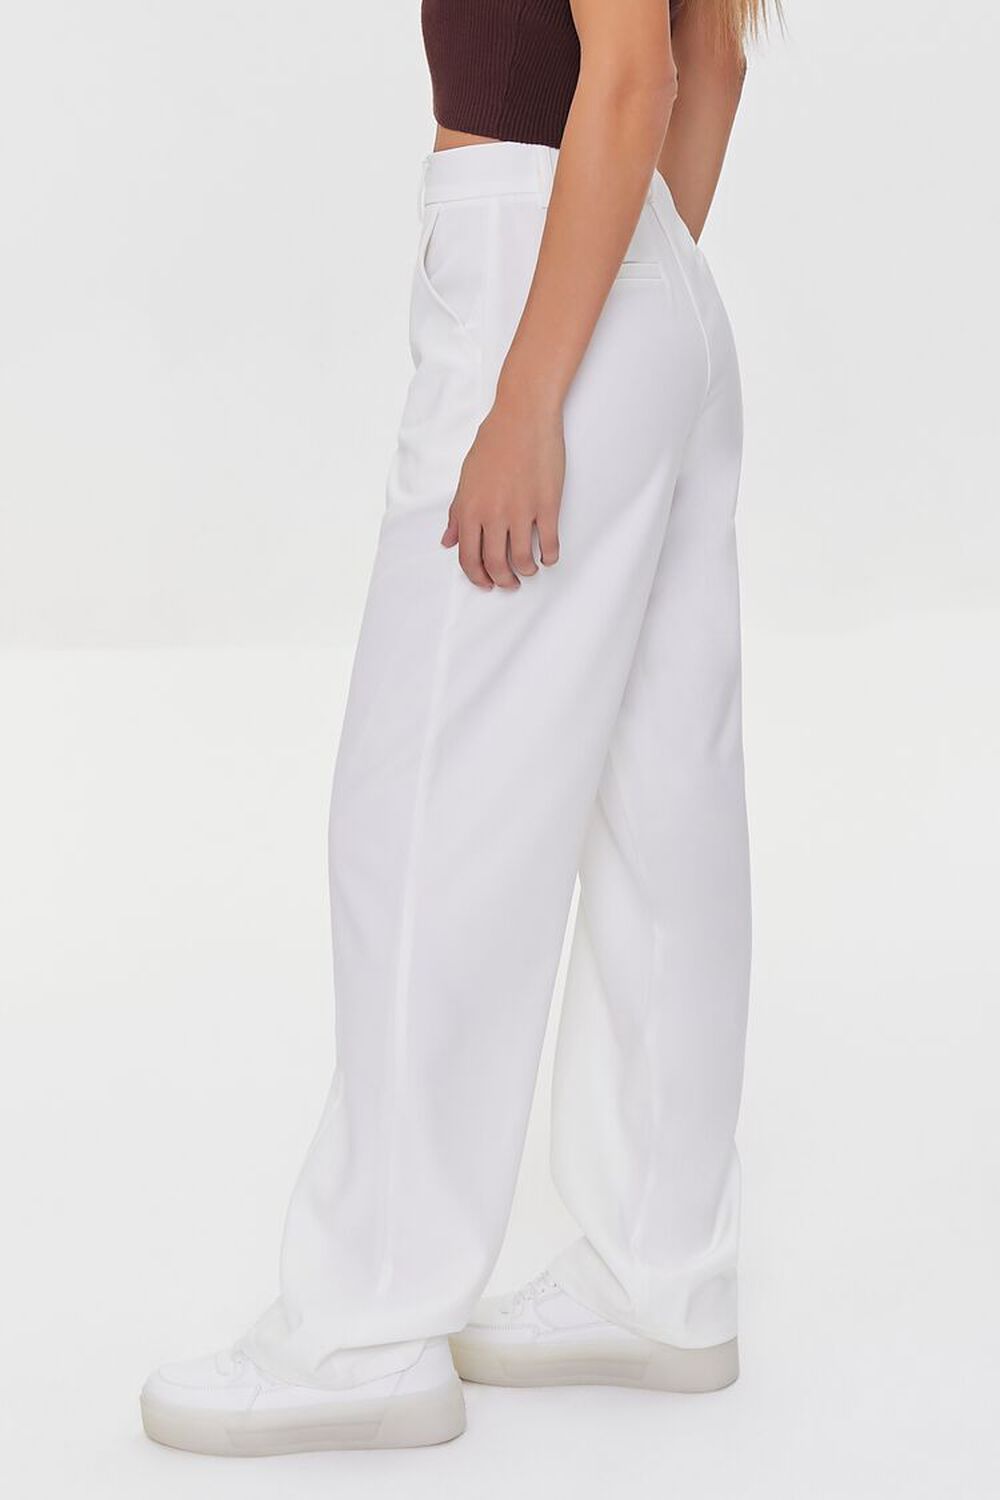 CREAM Relaxed High-Rise Pants, image 3